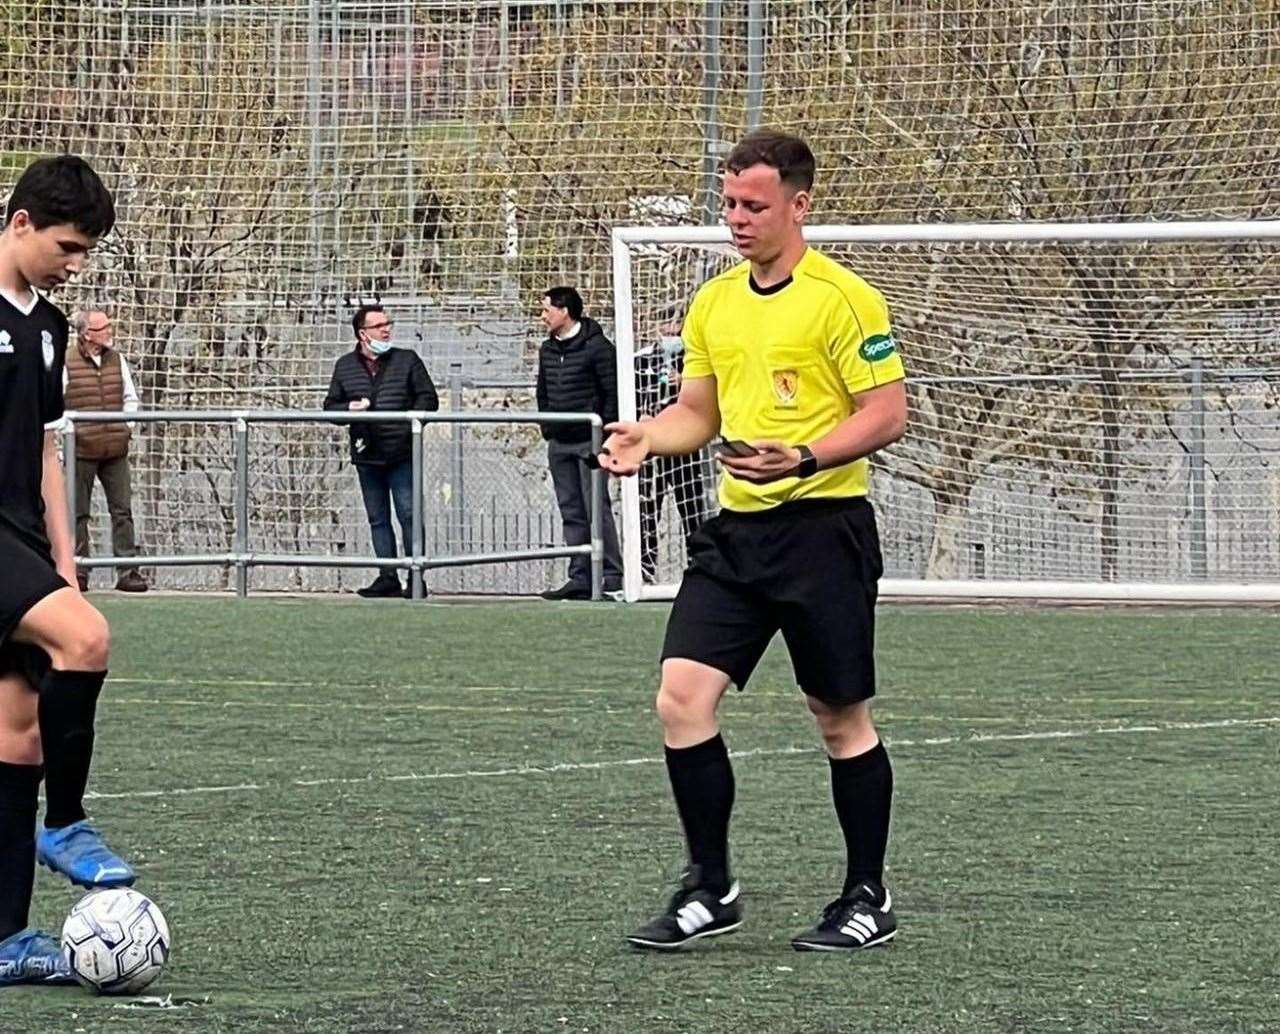 Rhys Jones has officiated matches involving top European clubs' youth teams.